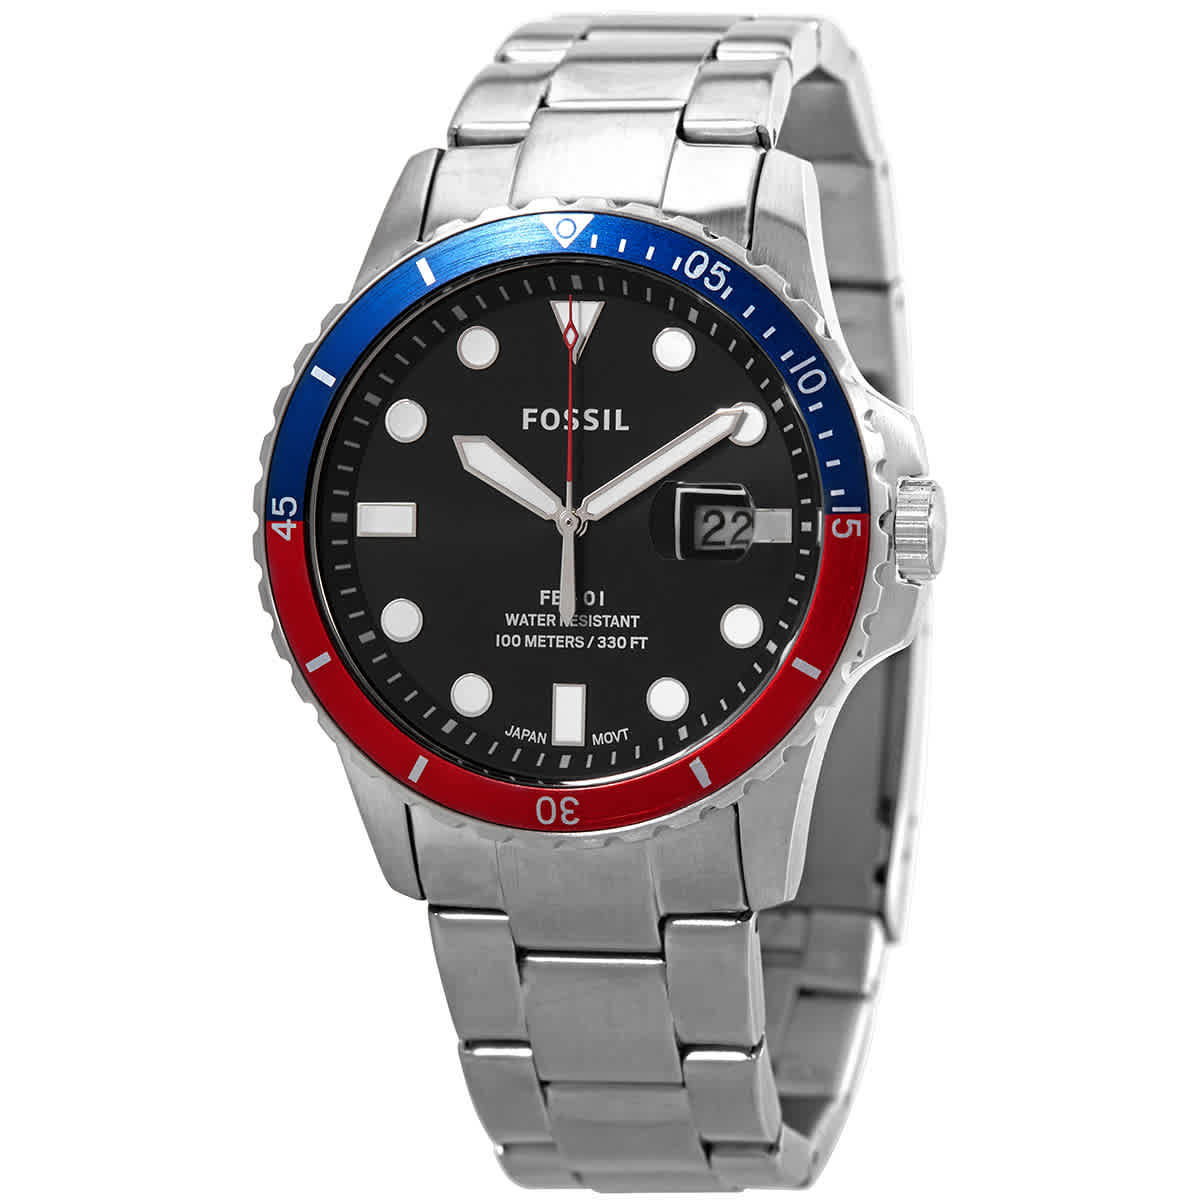 Fossil Quartz Black Dial Stainless Steel Mens Watch Fs5657 In Black,blue,grey,red,silver Tone